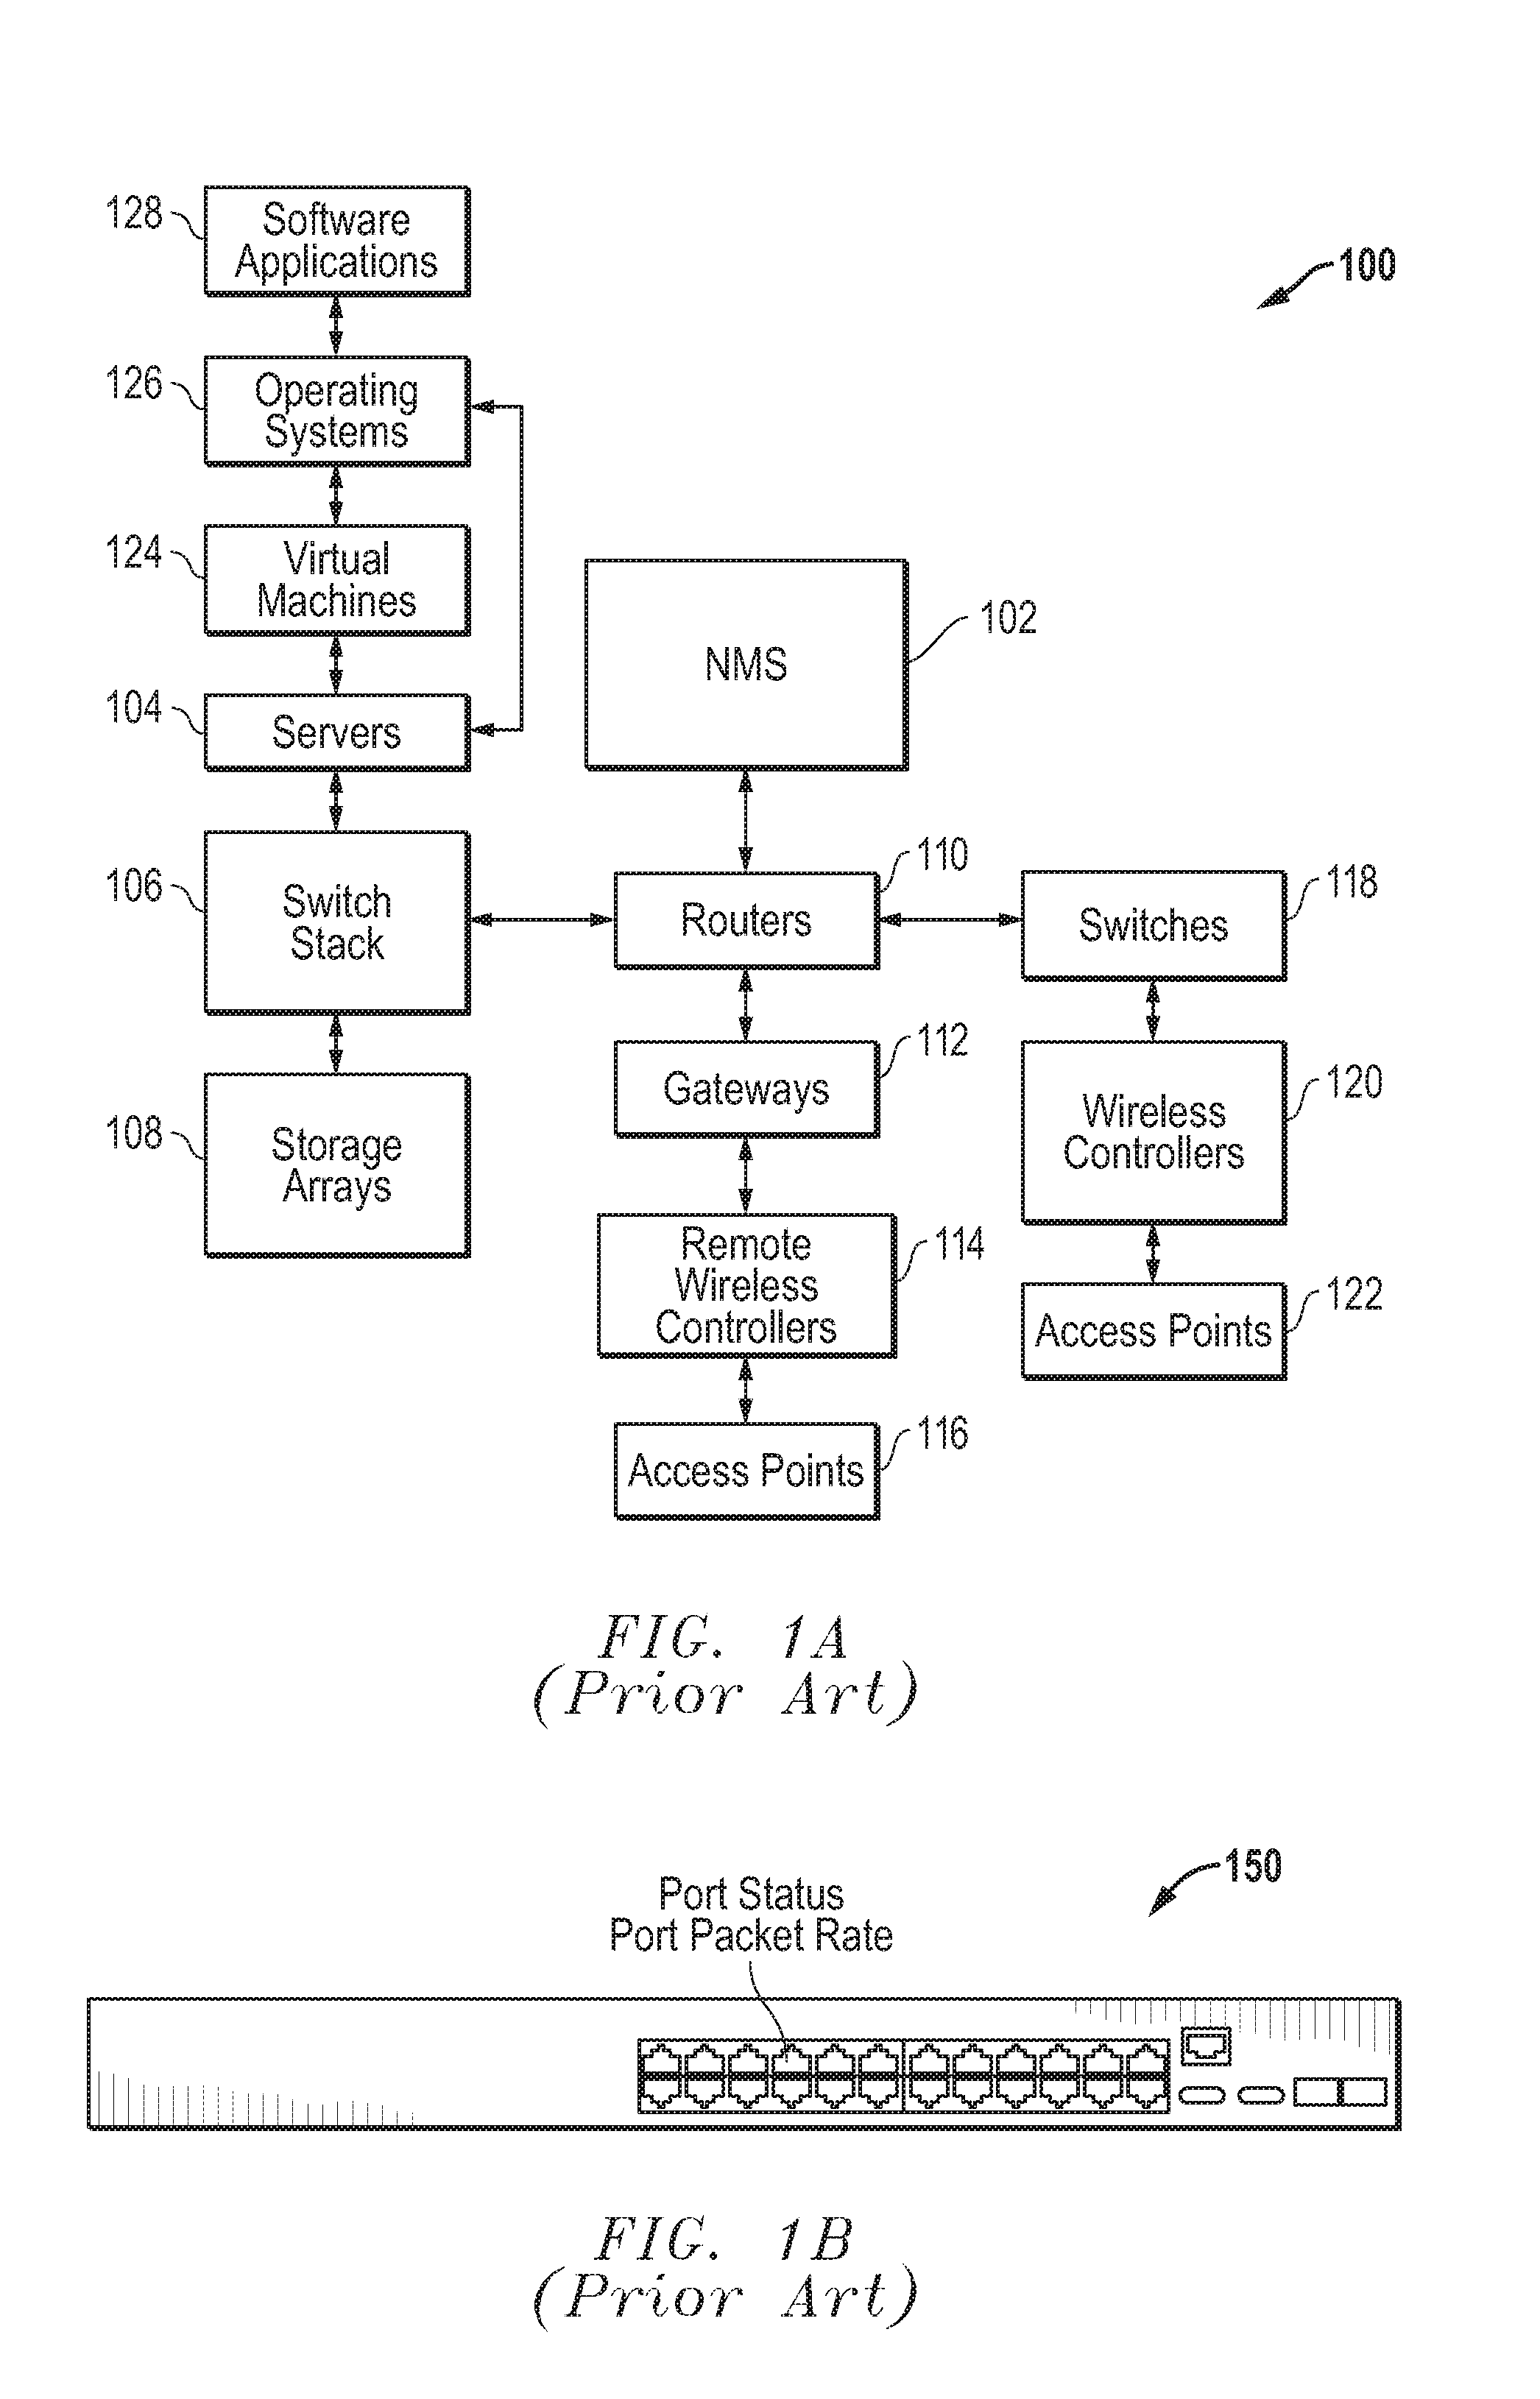 Systems And Methods For Analysis Of Network Equipment Command Line Interface (CLI) And Runtime Management Of User Interface (UI) Generation For Same